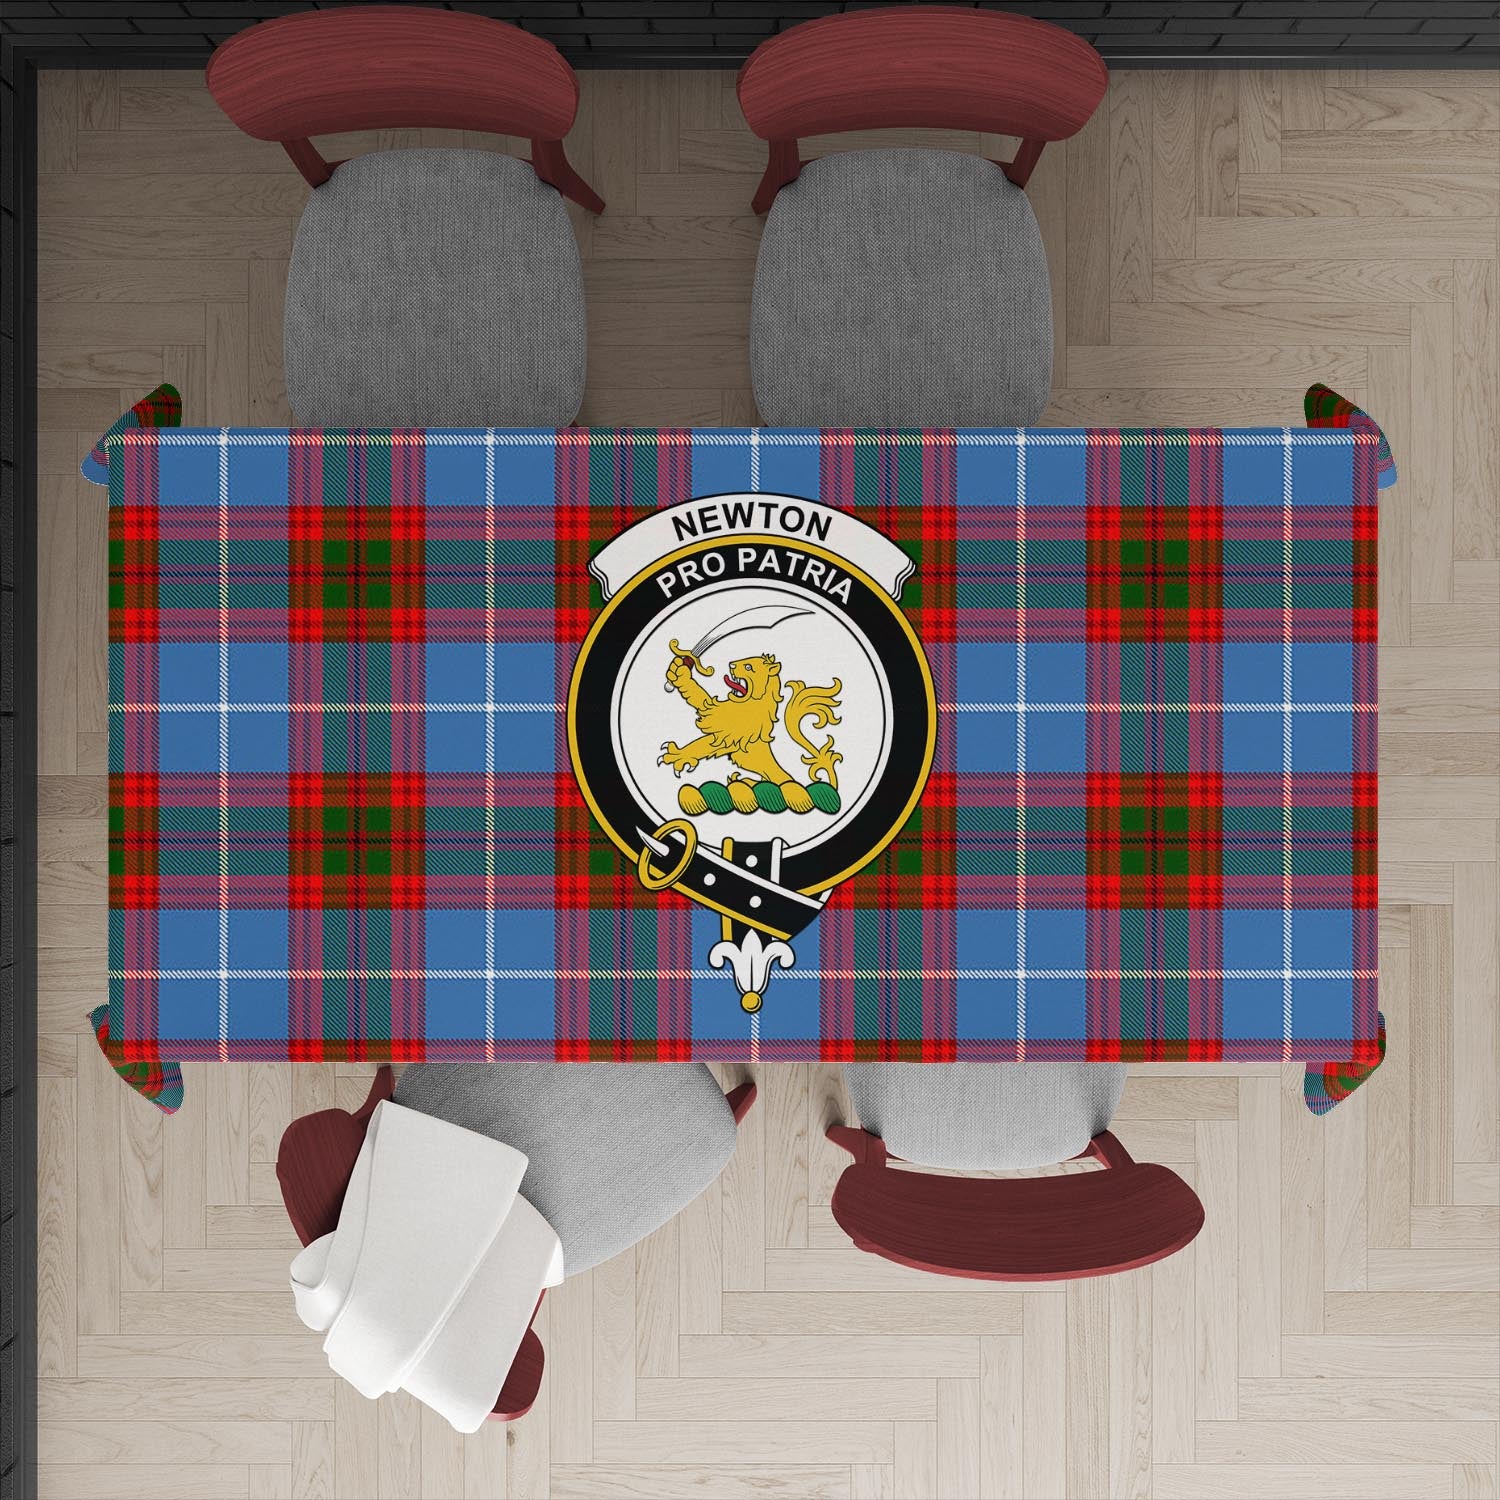 newton-tatan-tablecloth-with-family-crest